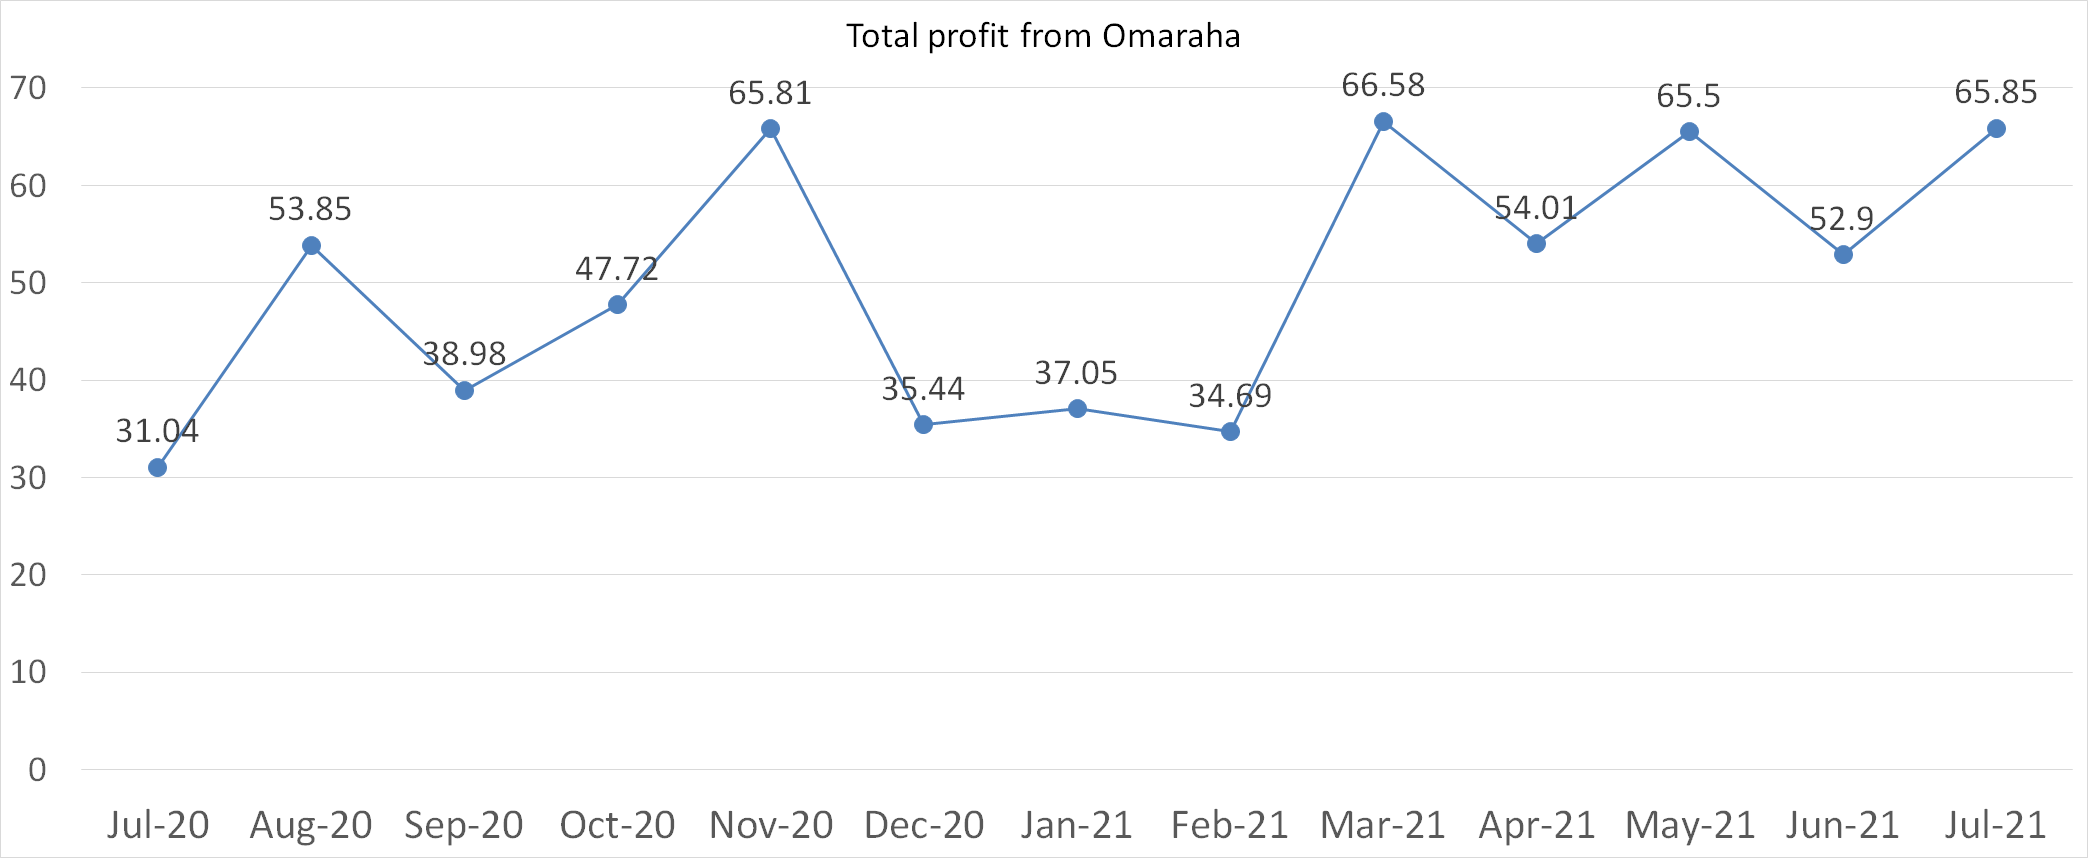 Total profit from Omaraha july 2021